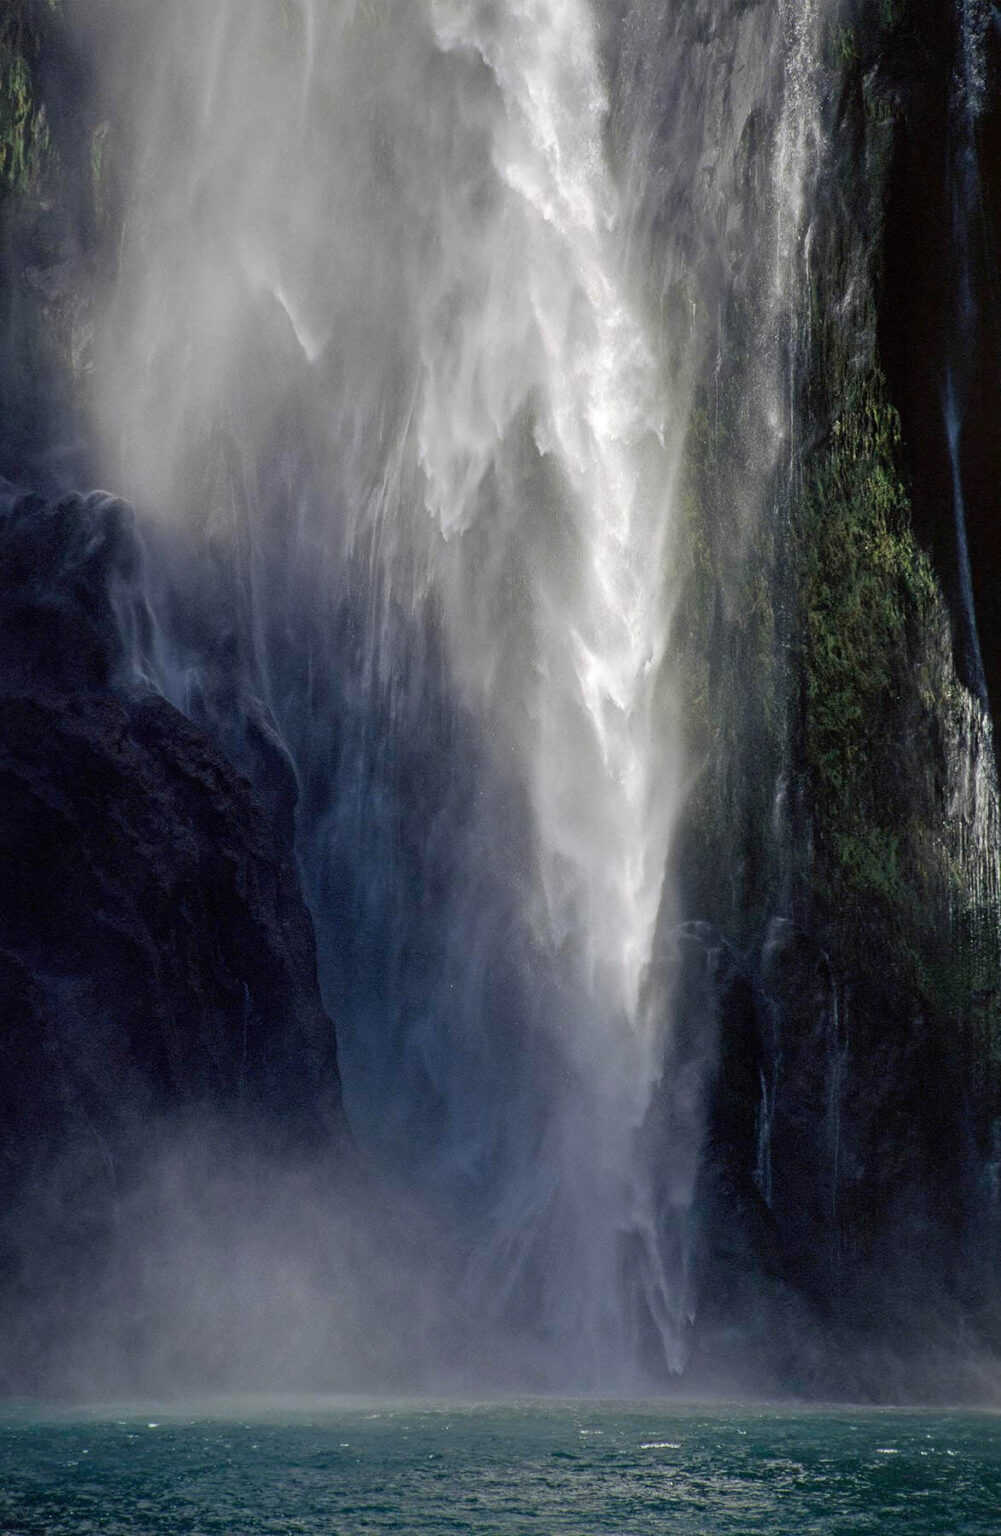 Detail of STERLING FALLS which drops 151 meters into MILFORD SOUND (actually a FIORD) - FIORDLAND  NATIONAL PARK, NEW ZEALAND'S SOUTH ISLAND